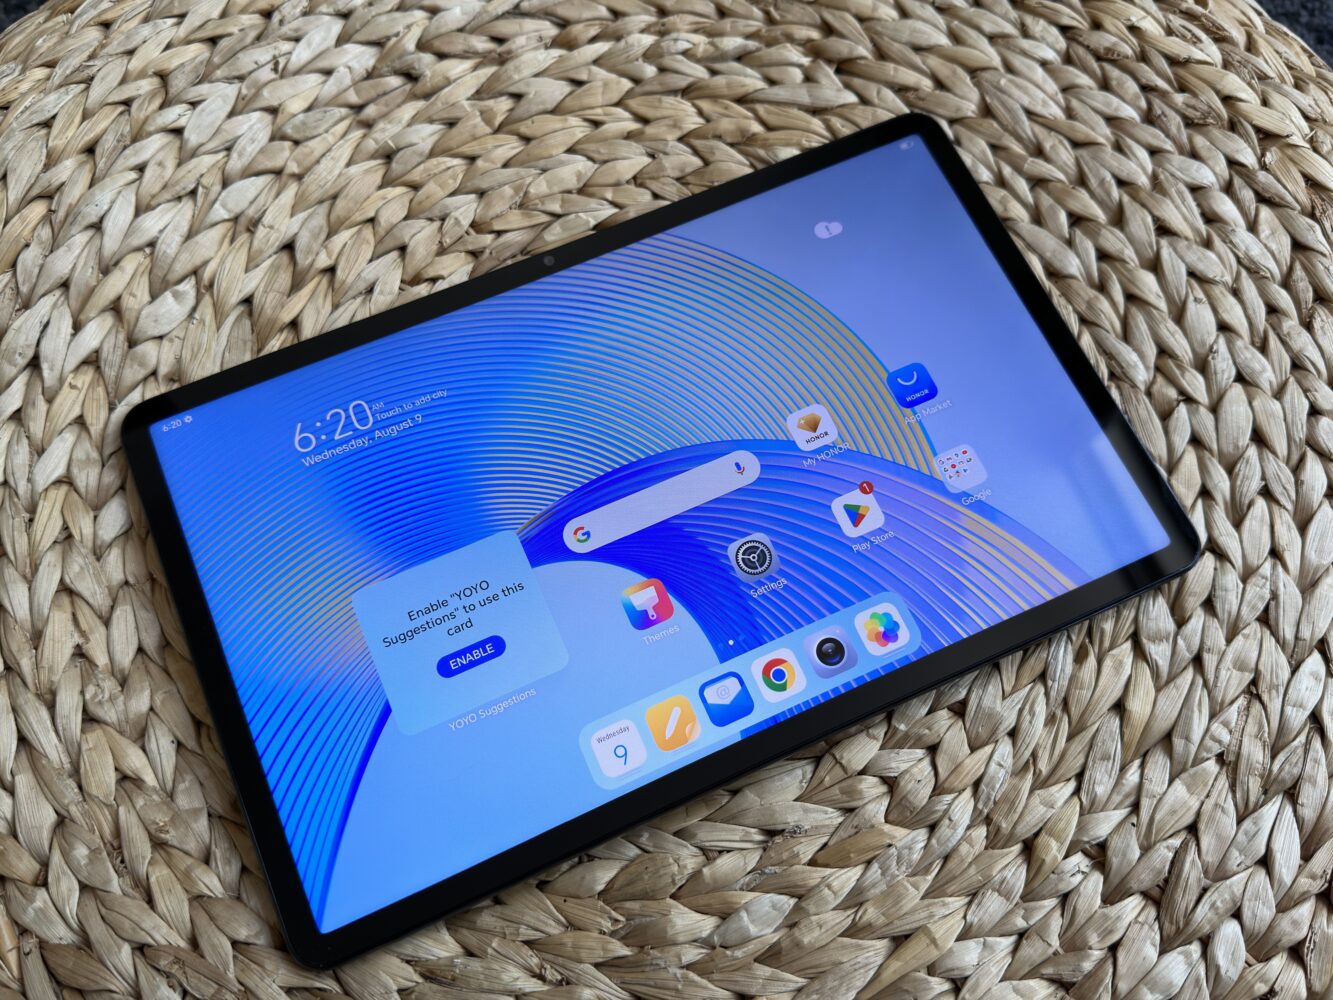 HONOR introduced the latest Pad X9 entry-level tablet – AndroidGuys